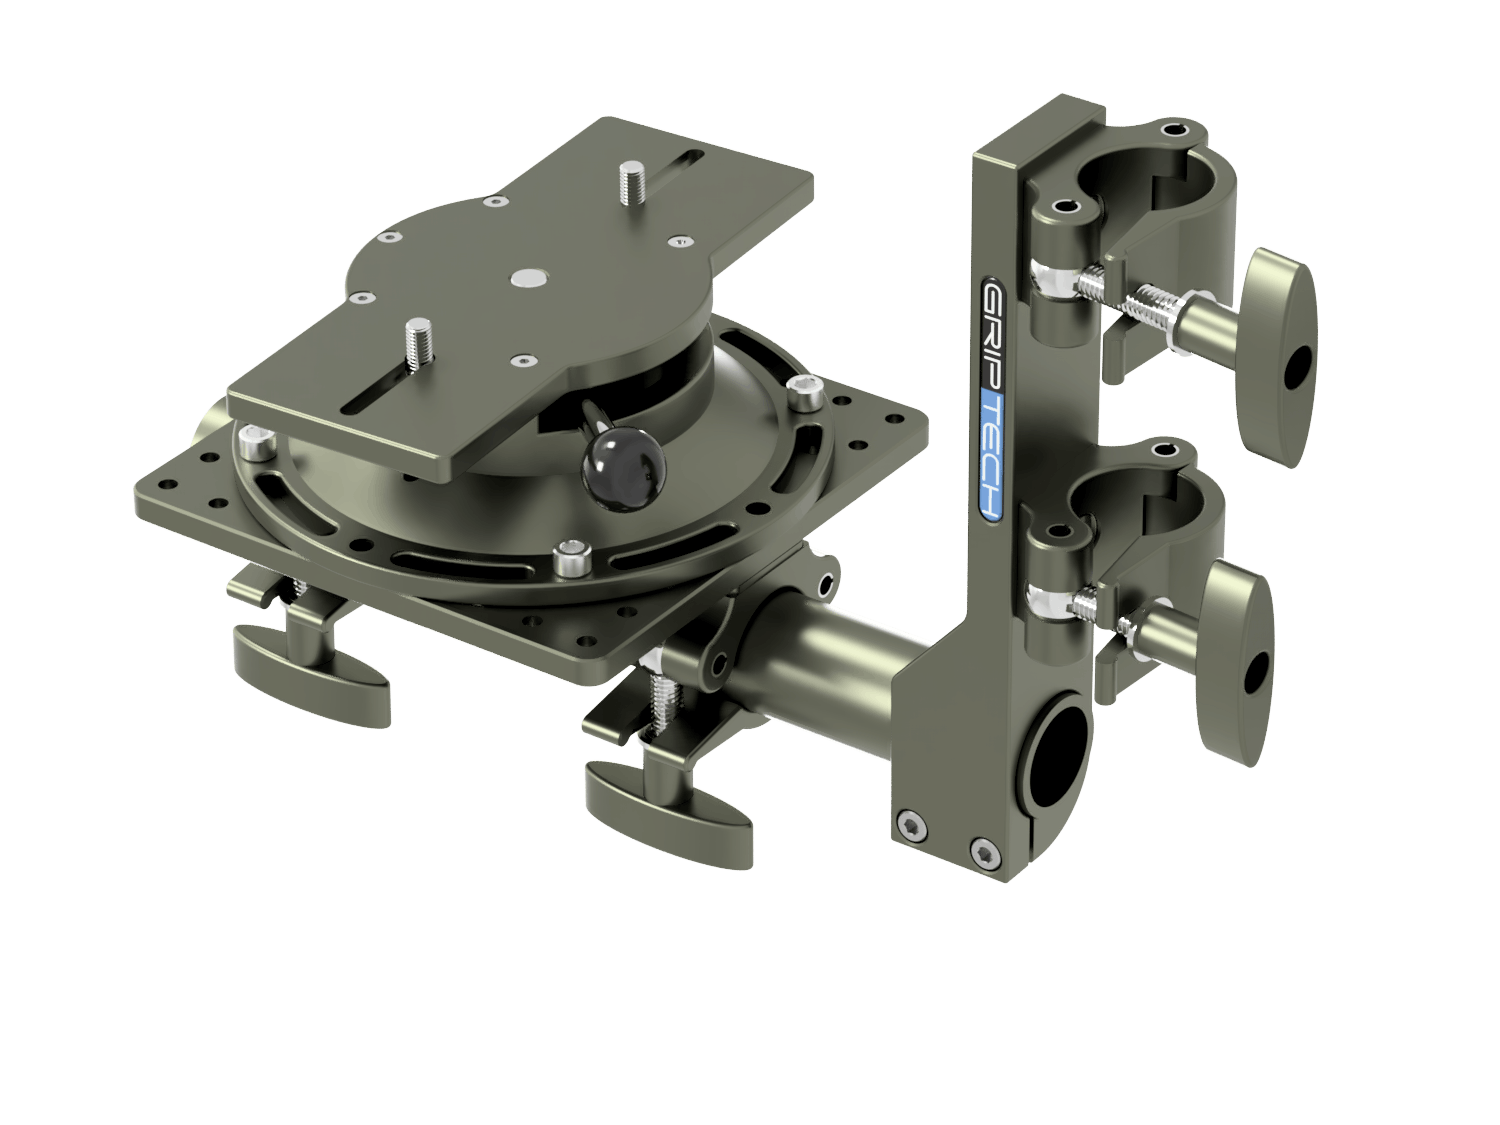 T Bar Bracket+ 1 Scaff Tube (L=600mm) + 1 Small Mounting Plate  + 2 Scaff Half Clamps + 1 Leveling Head